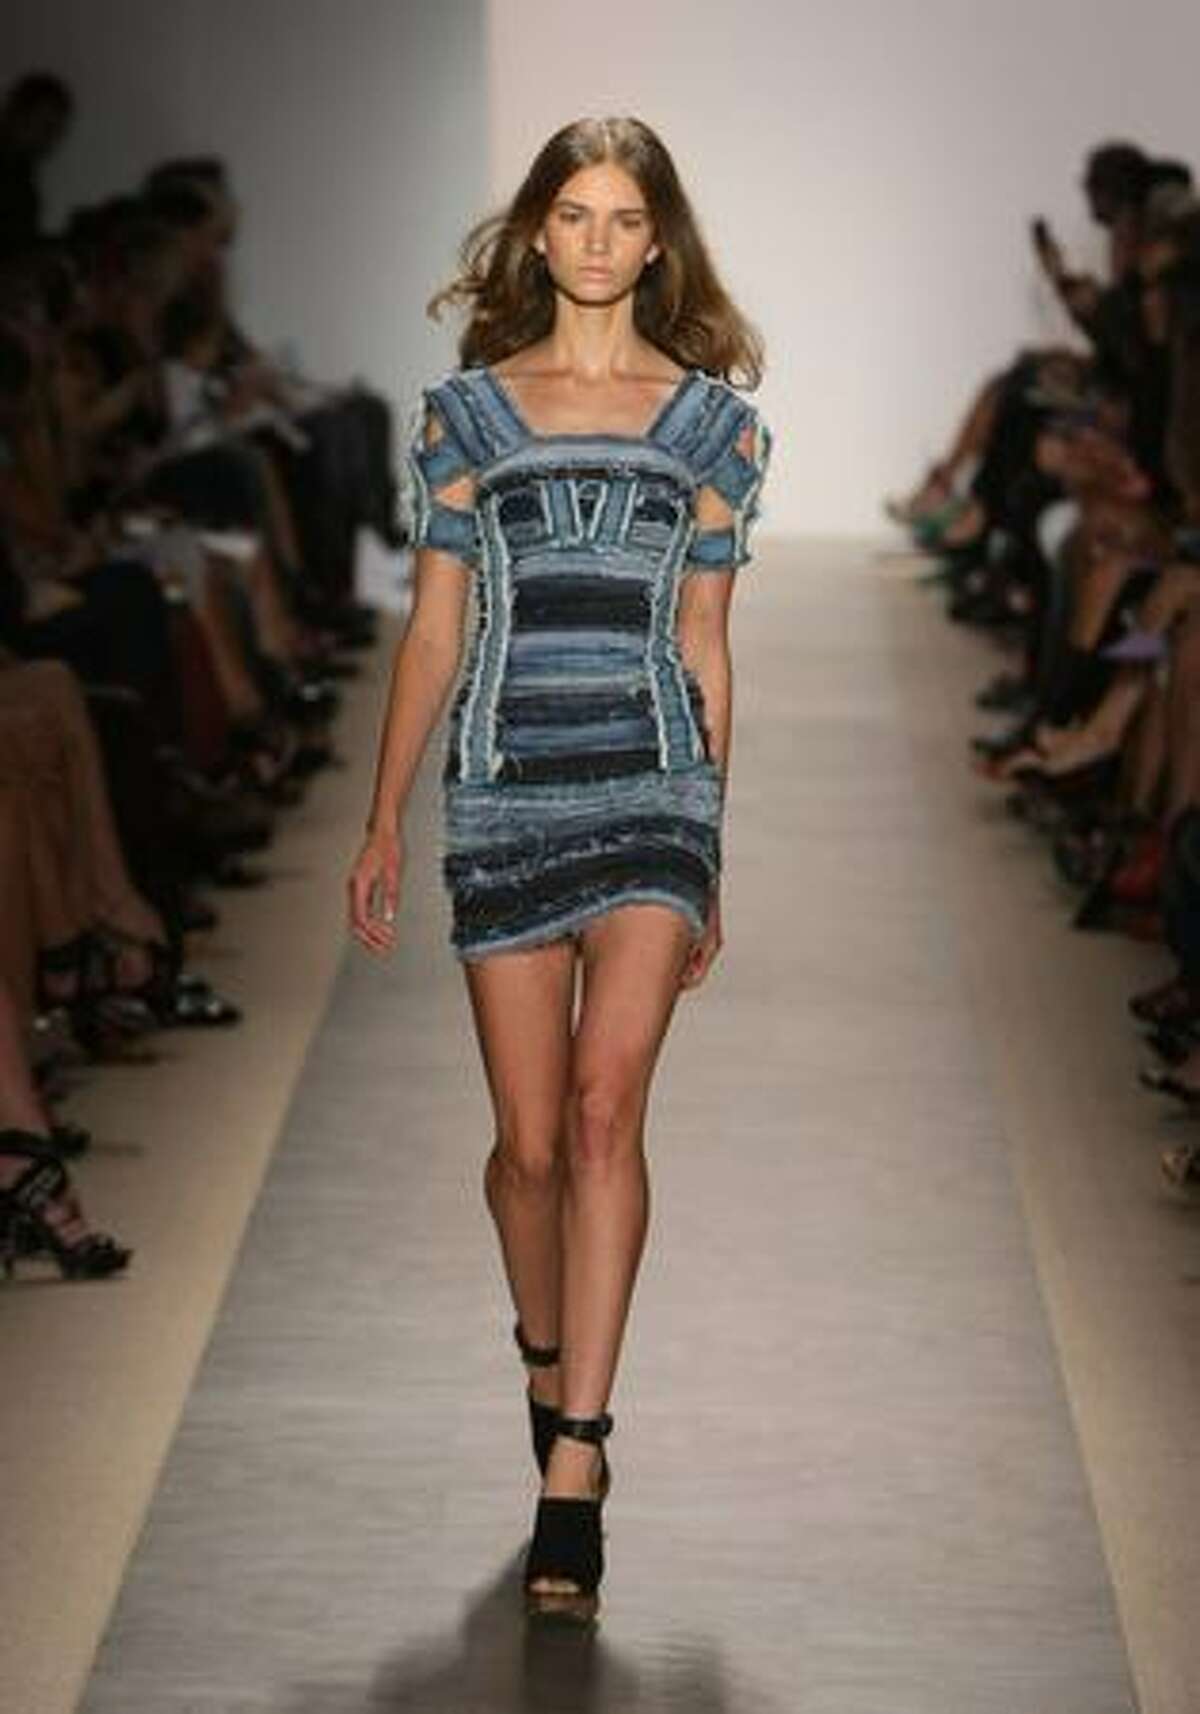 A model walks the runway during the the Herve Leger Spring 2010 Fashion Show at the Promenade at Bryant Park on Sunday in New York City.